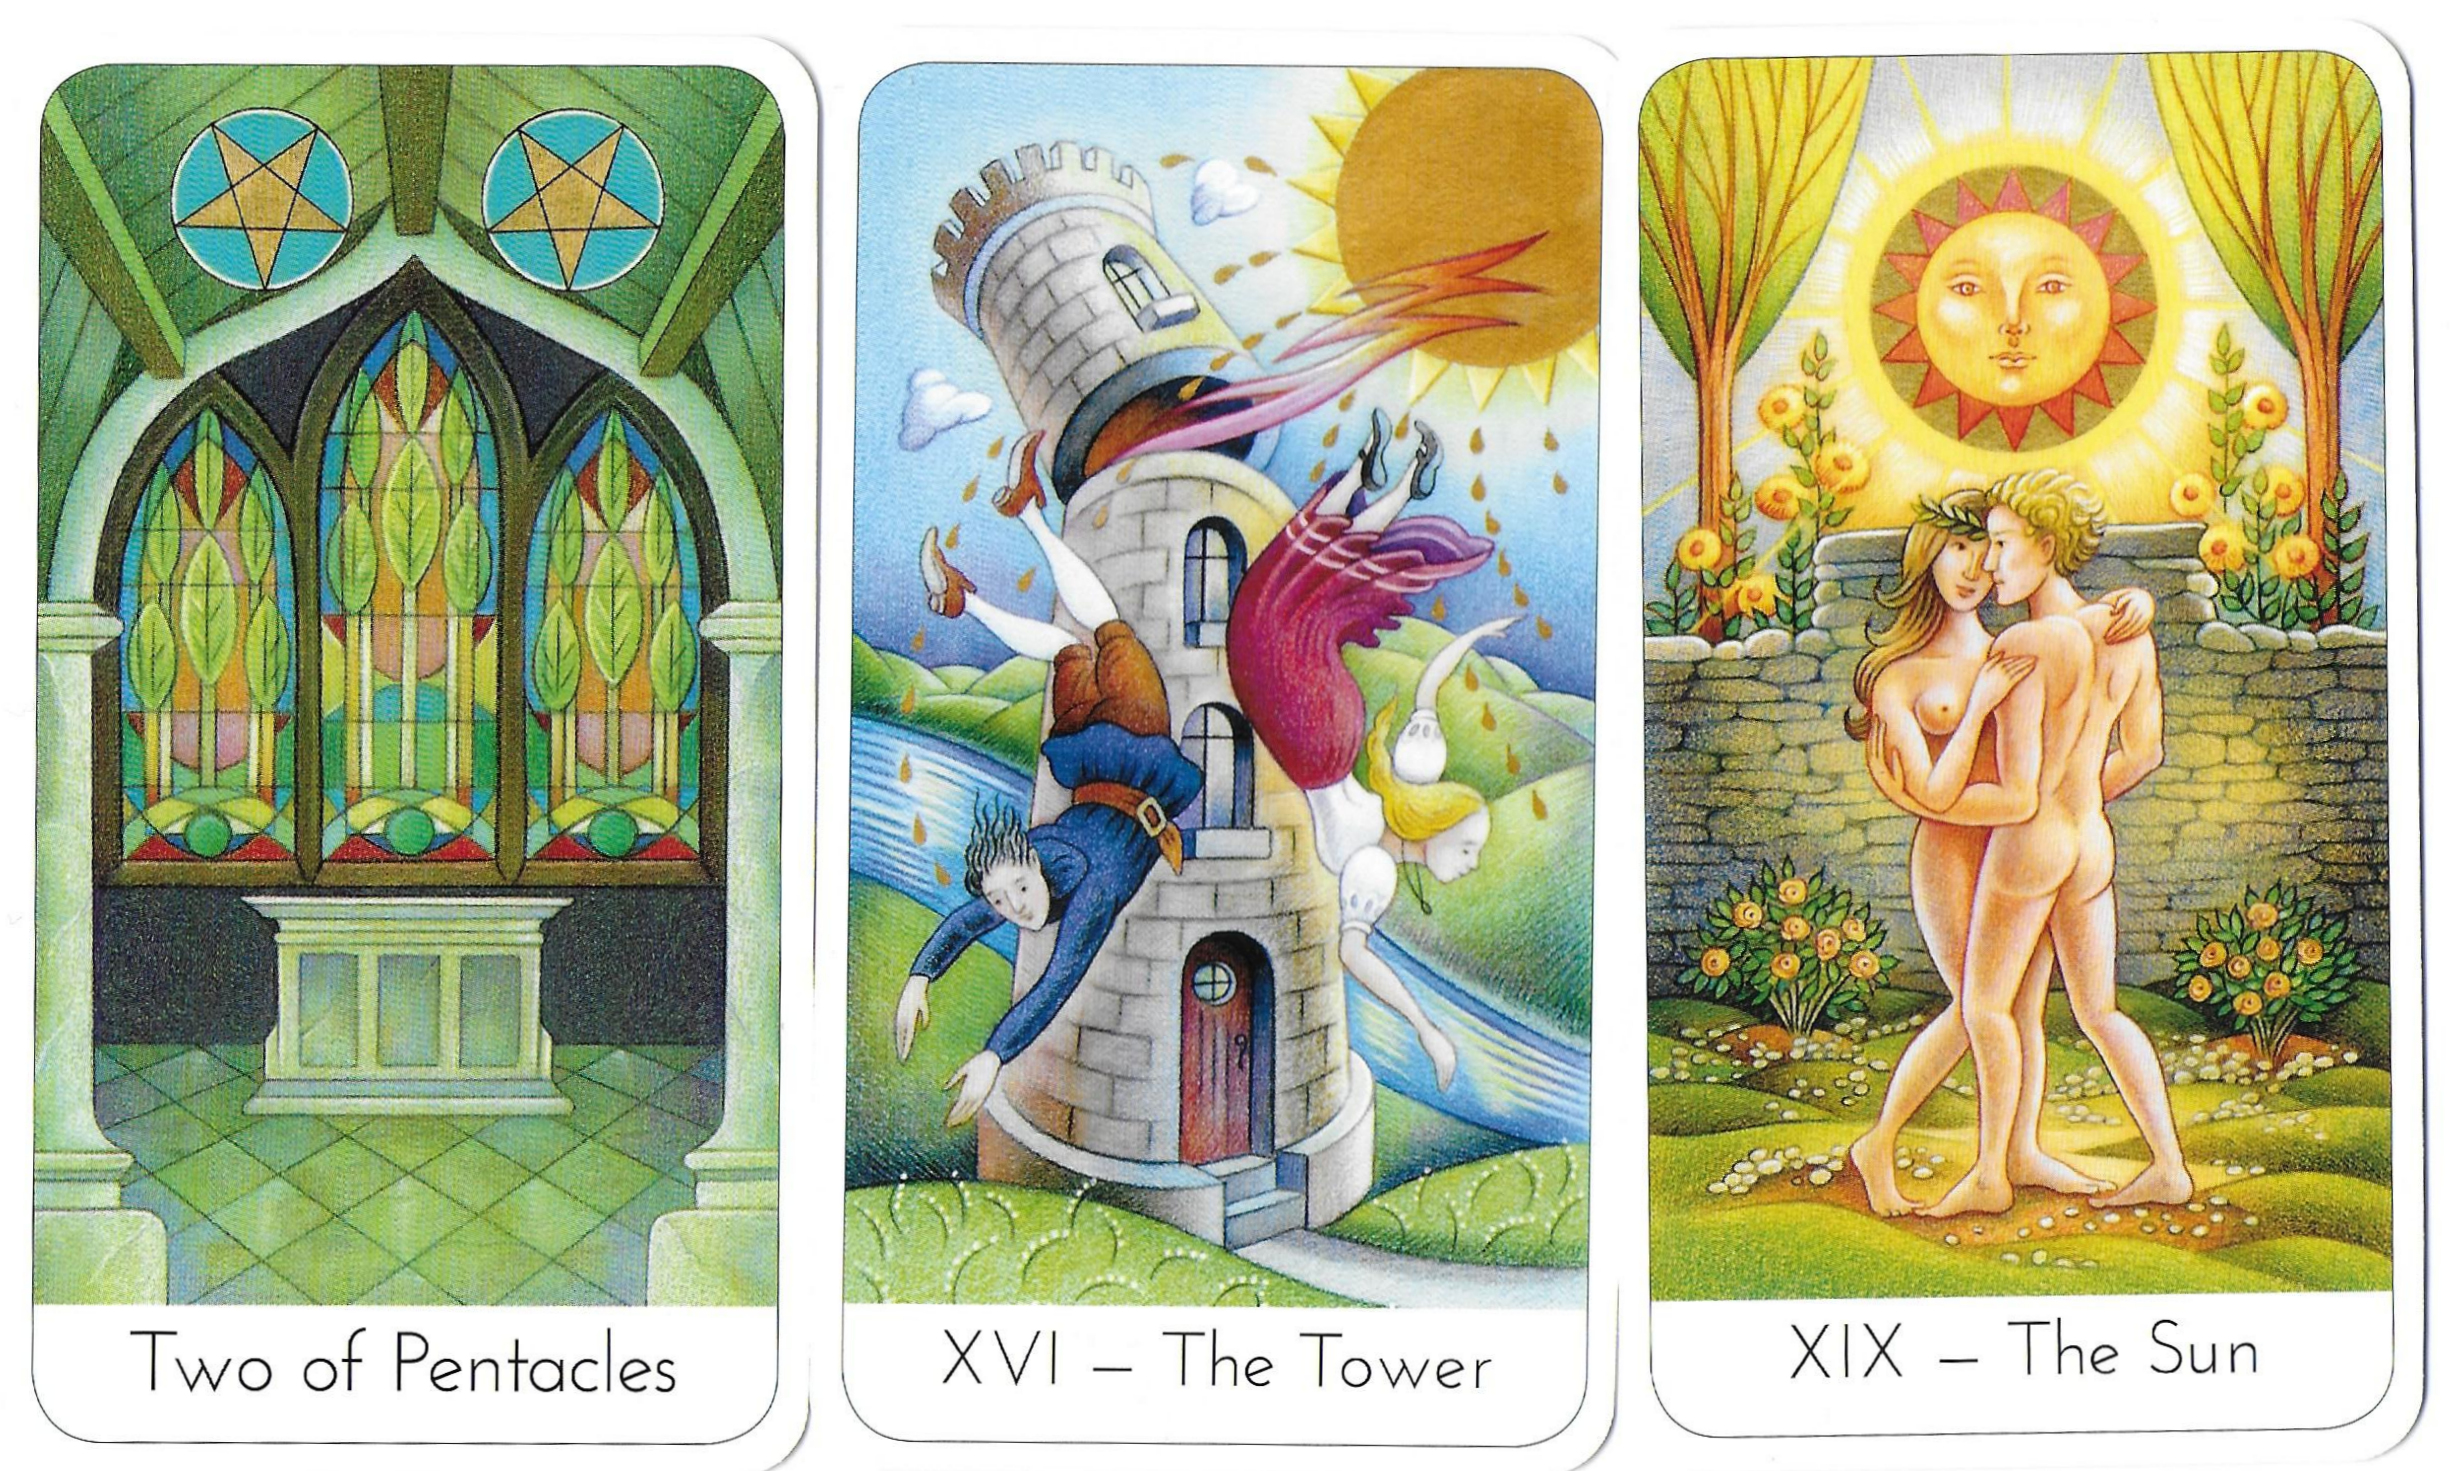 In this example reading we have the Two of Pentacles on the left and the Su...